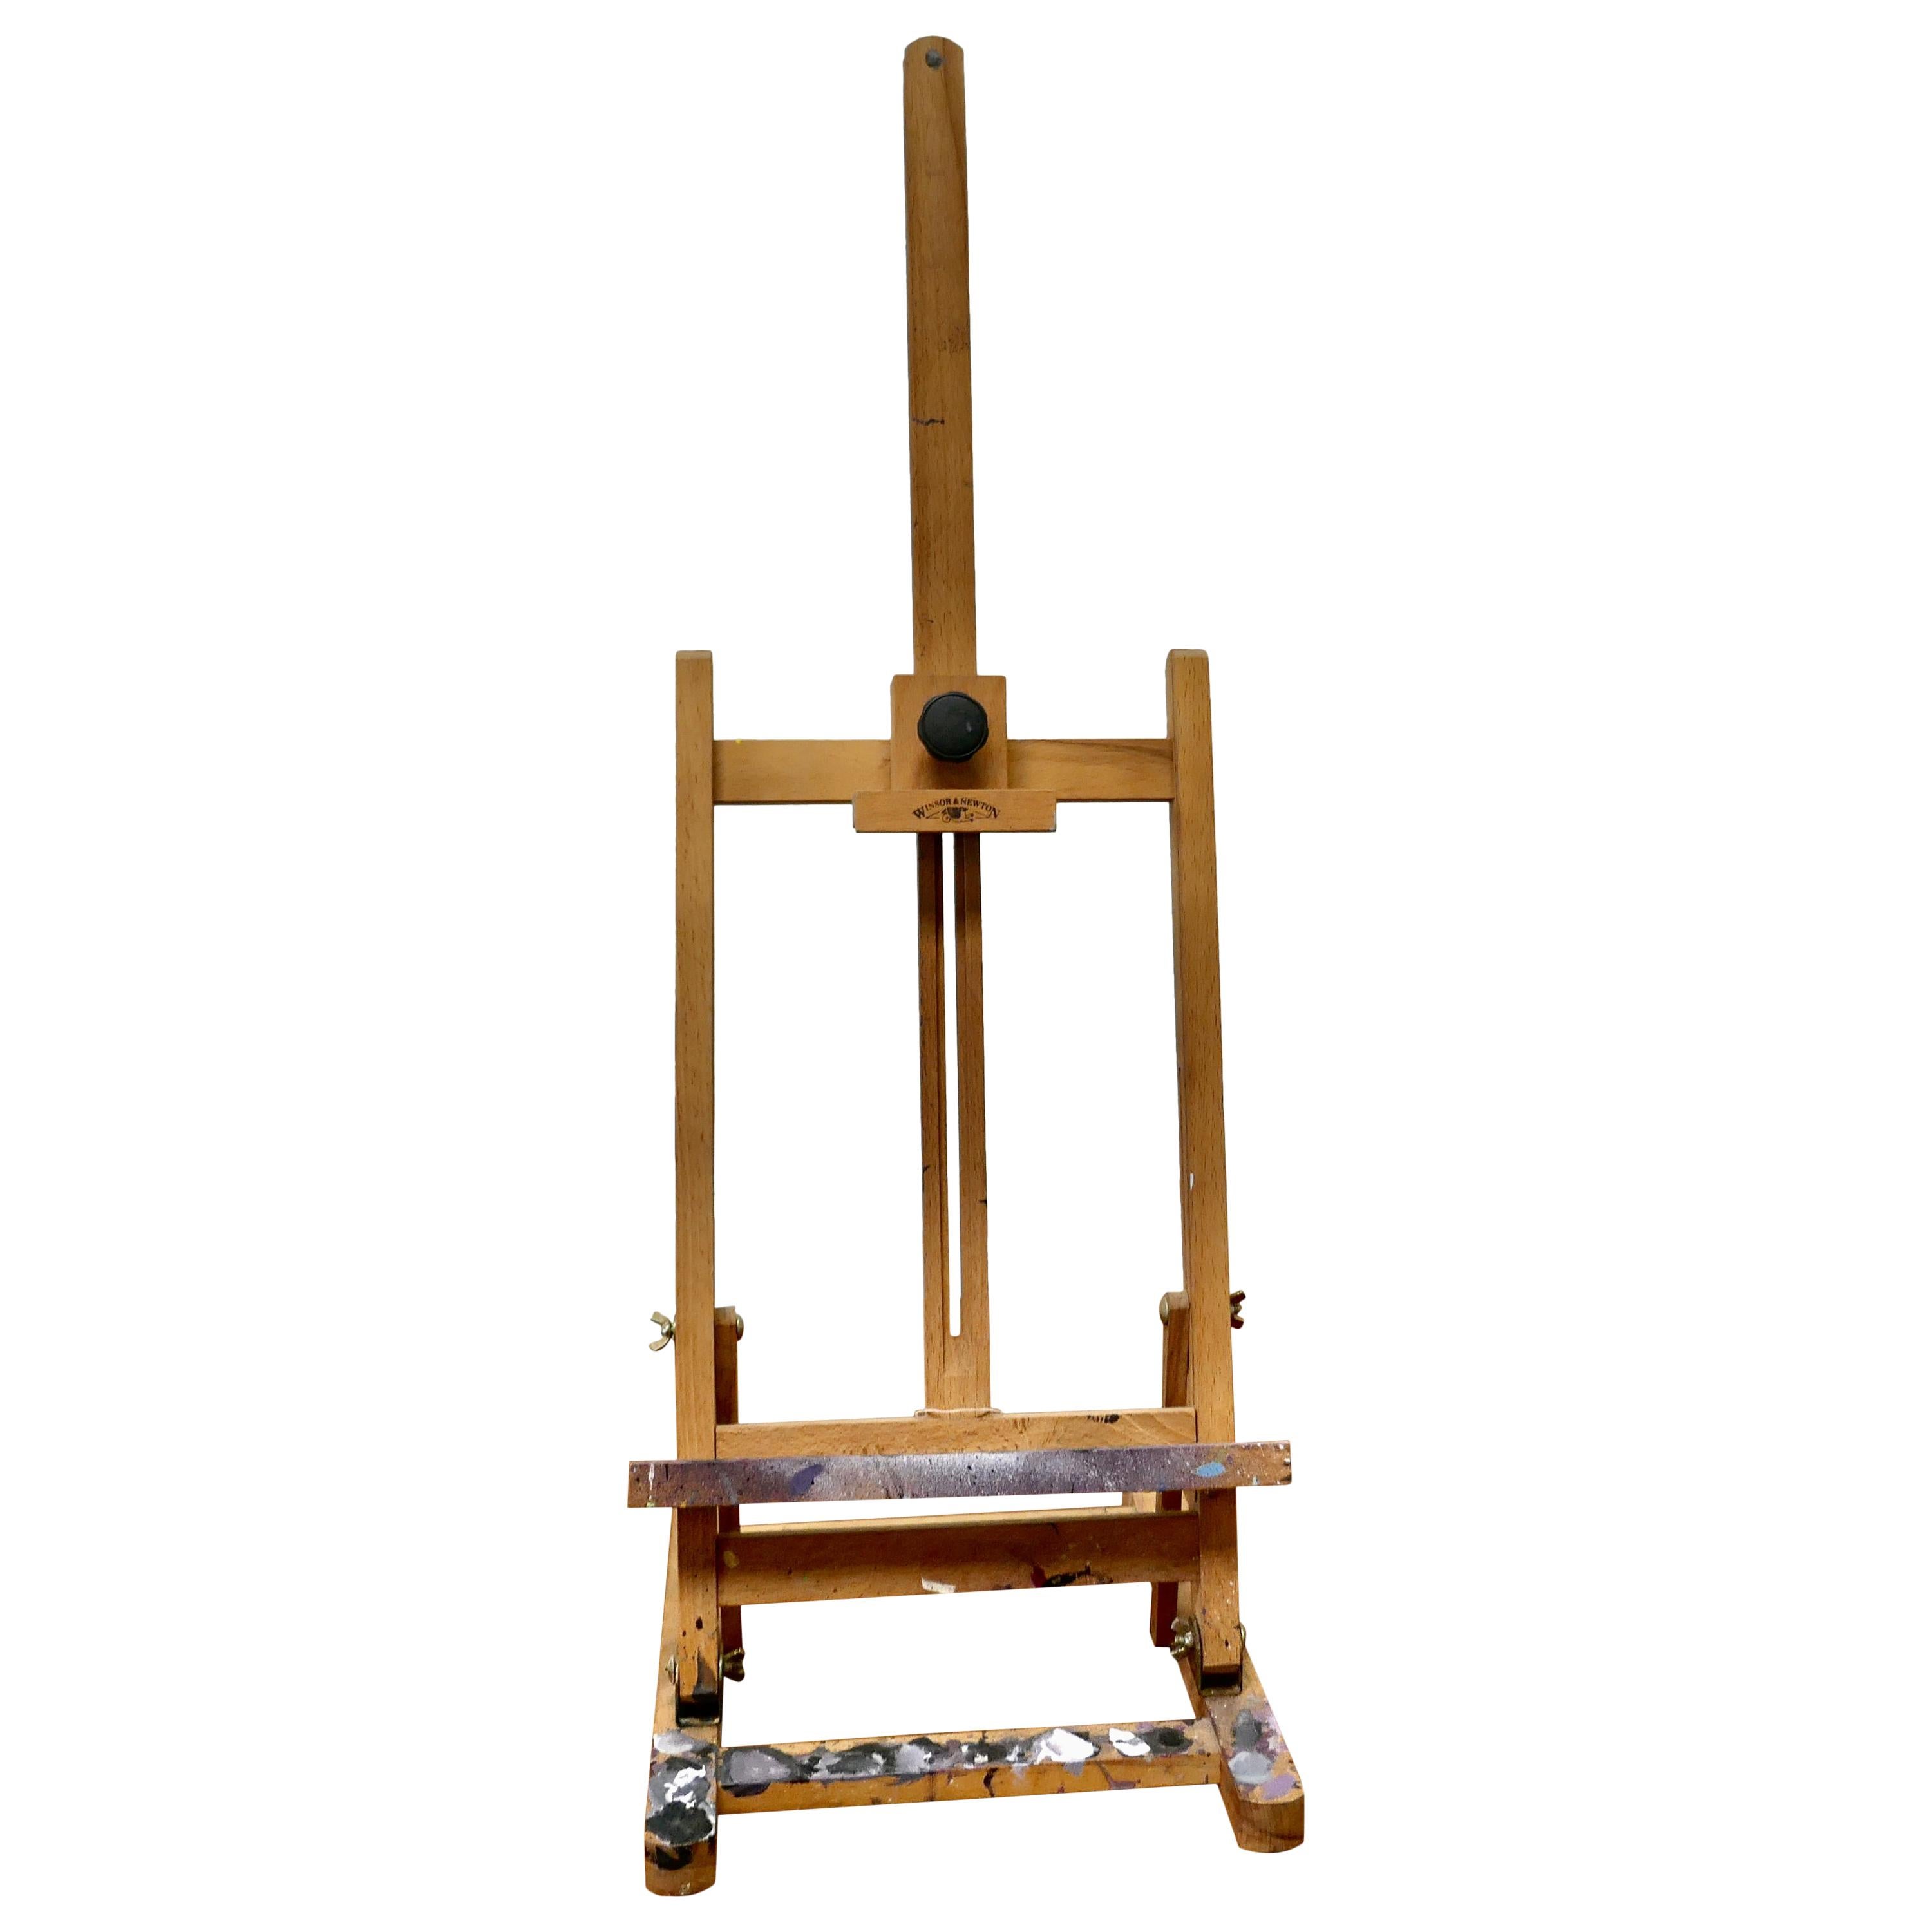 Paint Spattered Winsor and Newton Folding Table Top Easel